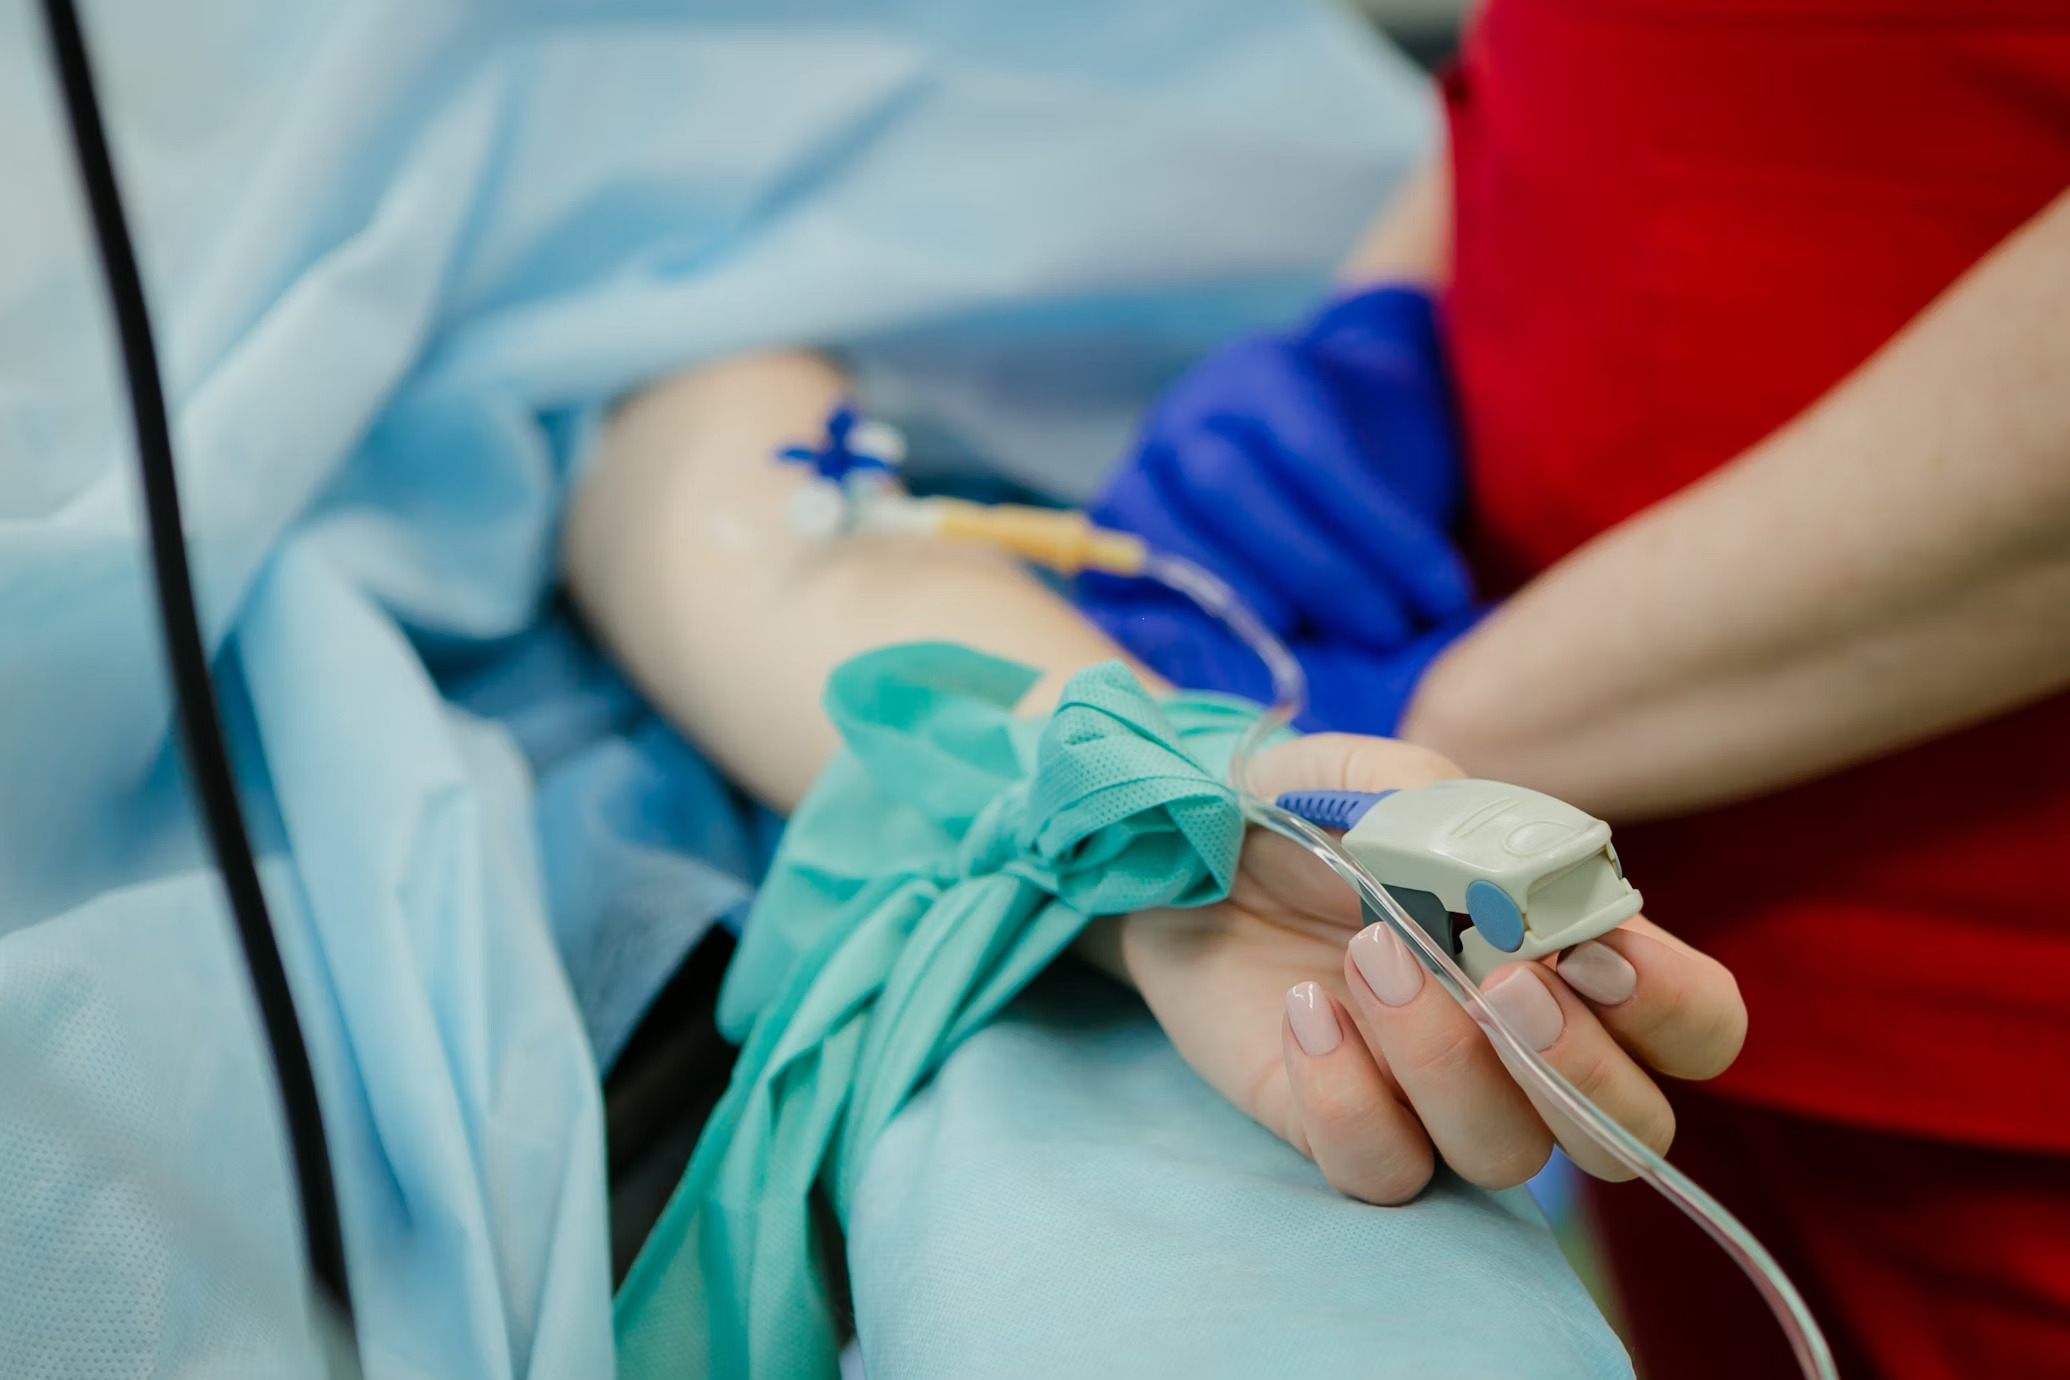 arm of person lying on hospital bed with IV